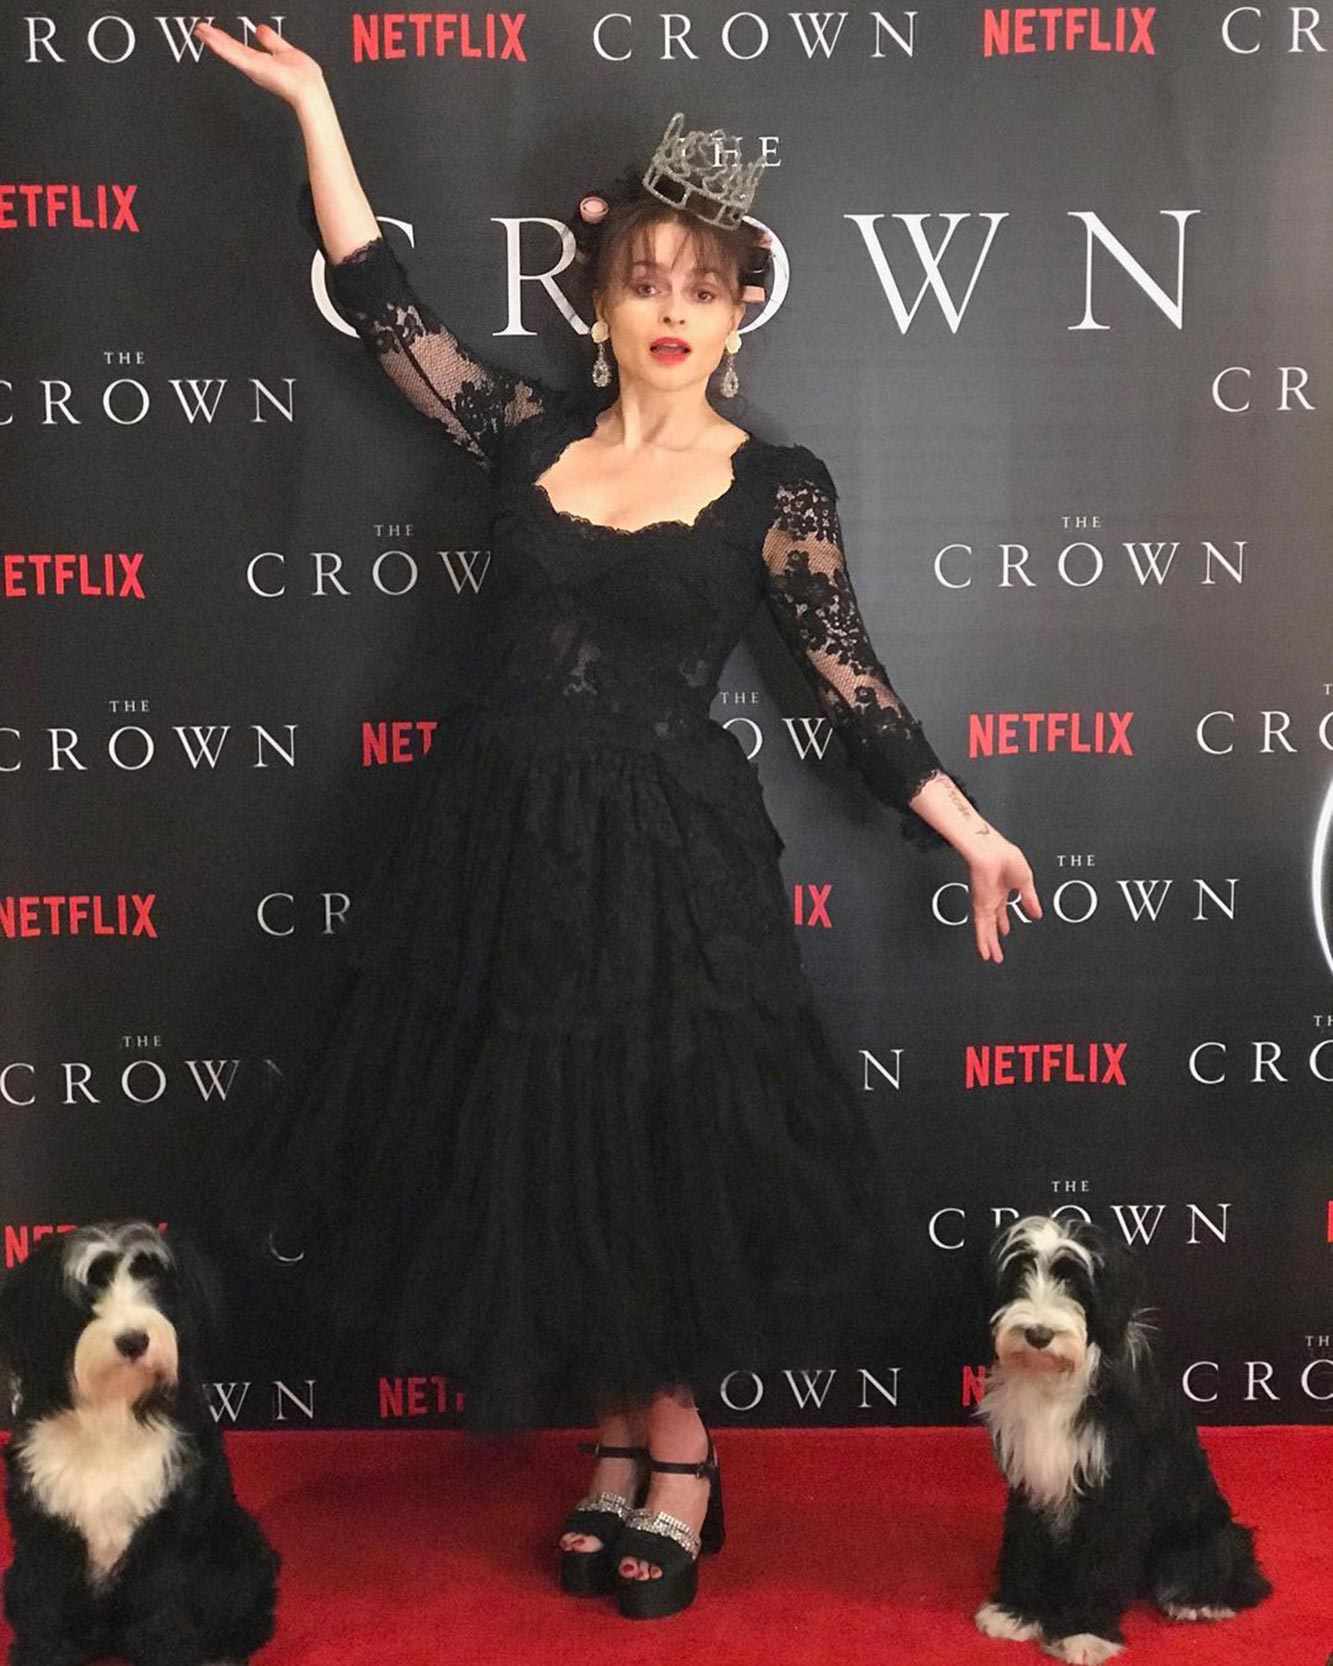 The Crown Red carpet